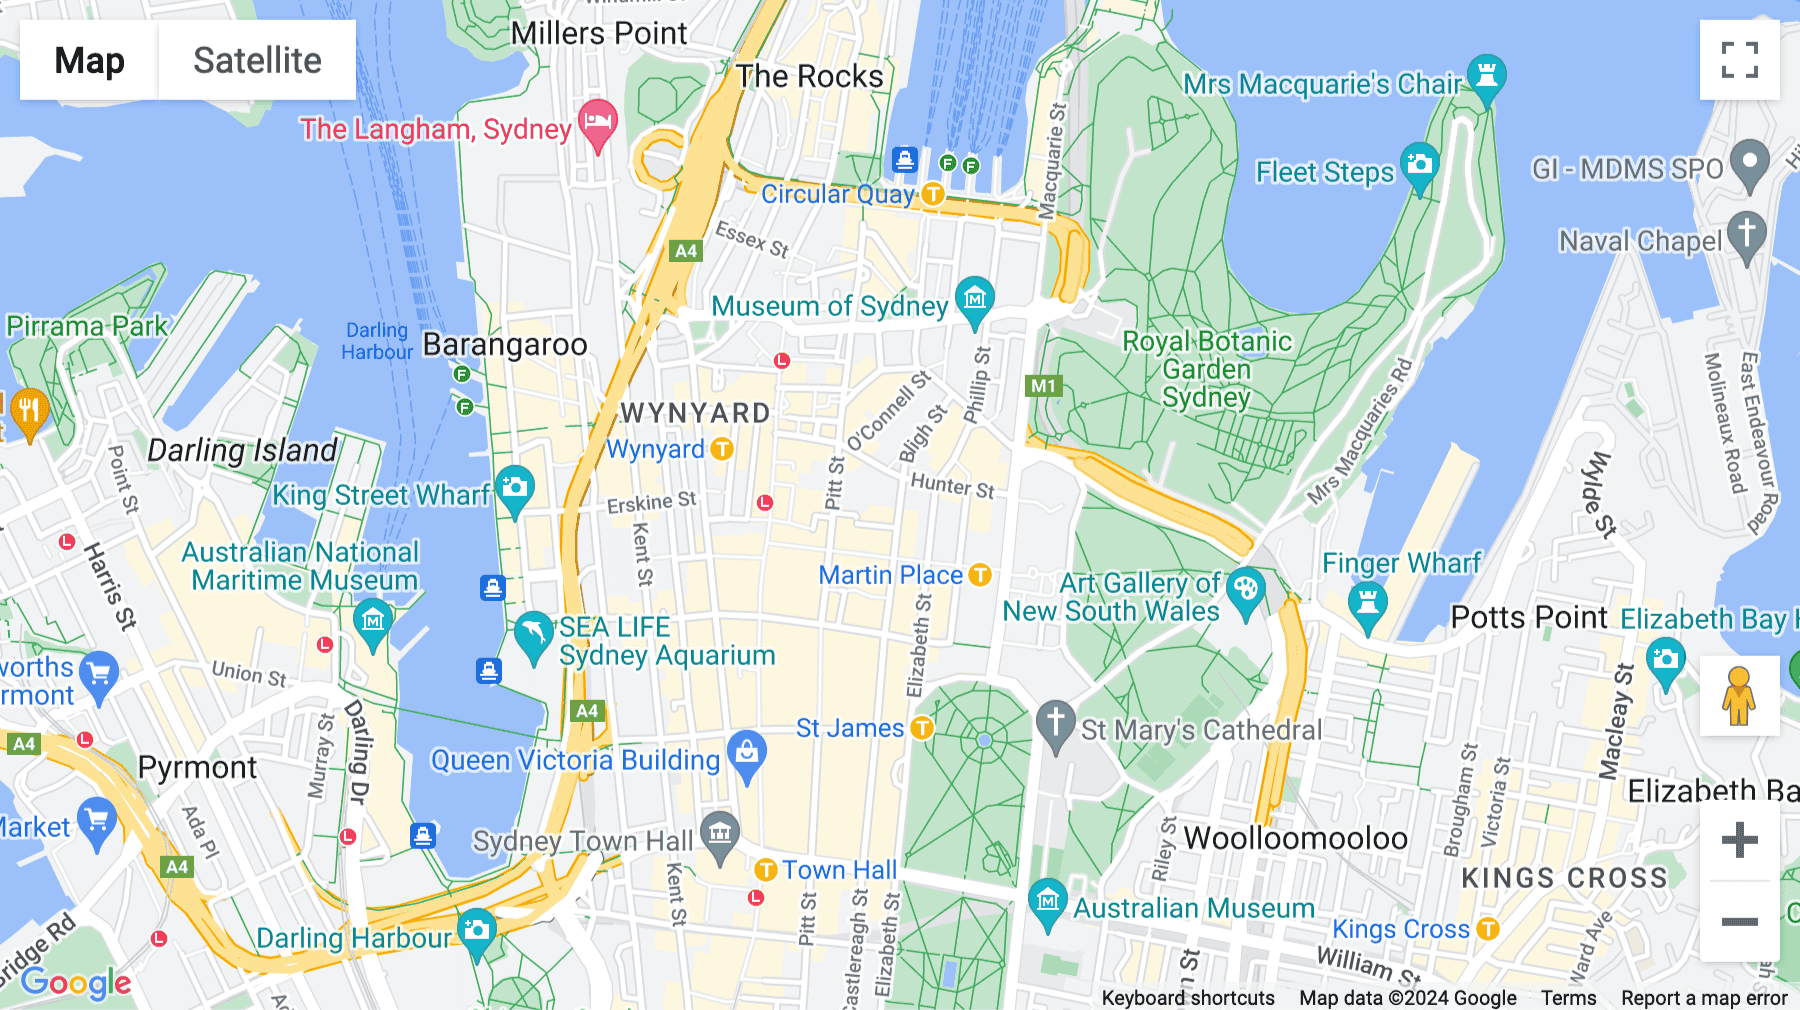 Click for interative map of Level 16 &17, 9 Castlereagh Street, Sydney, New South Wales, Australia, Sydney